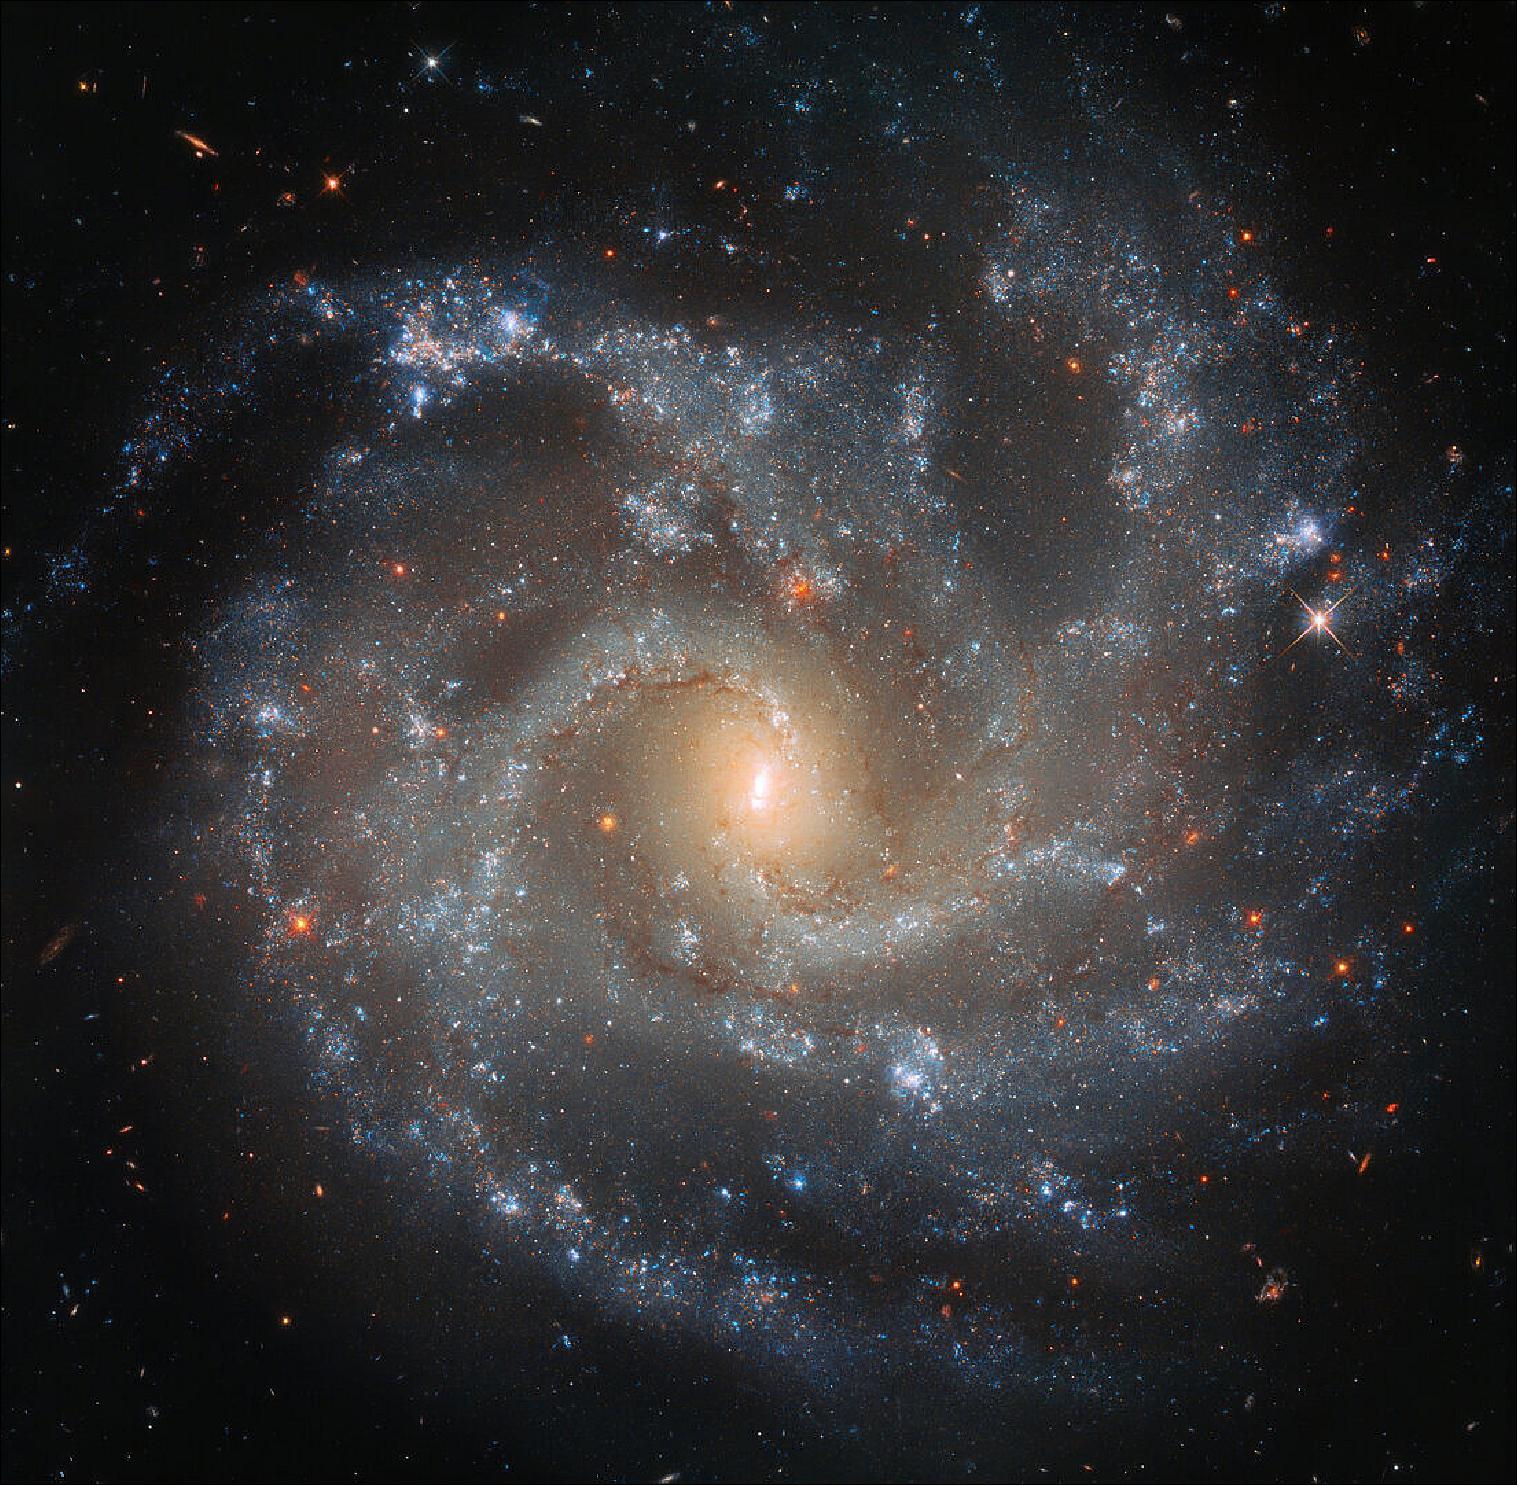 Figure 6: In the last 20 years the galaxy NGC 5468, visible in this image, has hosted a number of observed supernovae of both the aforementioned types: SN 1999cp, SN 2002cr, SN2002ed, SN2005P, and SN2018dfg. Despite being just over 130 million light-years away, the orientation of the galaxy with respect to us makes it easier to spot these new ‘stars’ as they appear; we see NGC 5468 face on, meaning we can see the galaxy’s loose, open spiral pattern in beautiful detail in images such as this one from the NASA/ESA Hubble Space Telescope (image credit: ESA/Hubble & NASA, W. Li et al.; Acknowledgements: Judy Schmidt (Geckzilla); CC BY 4.0)